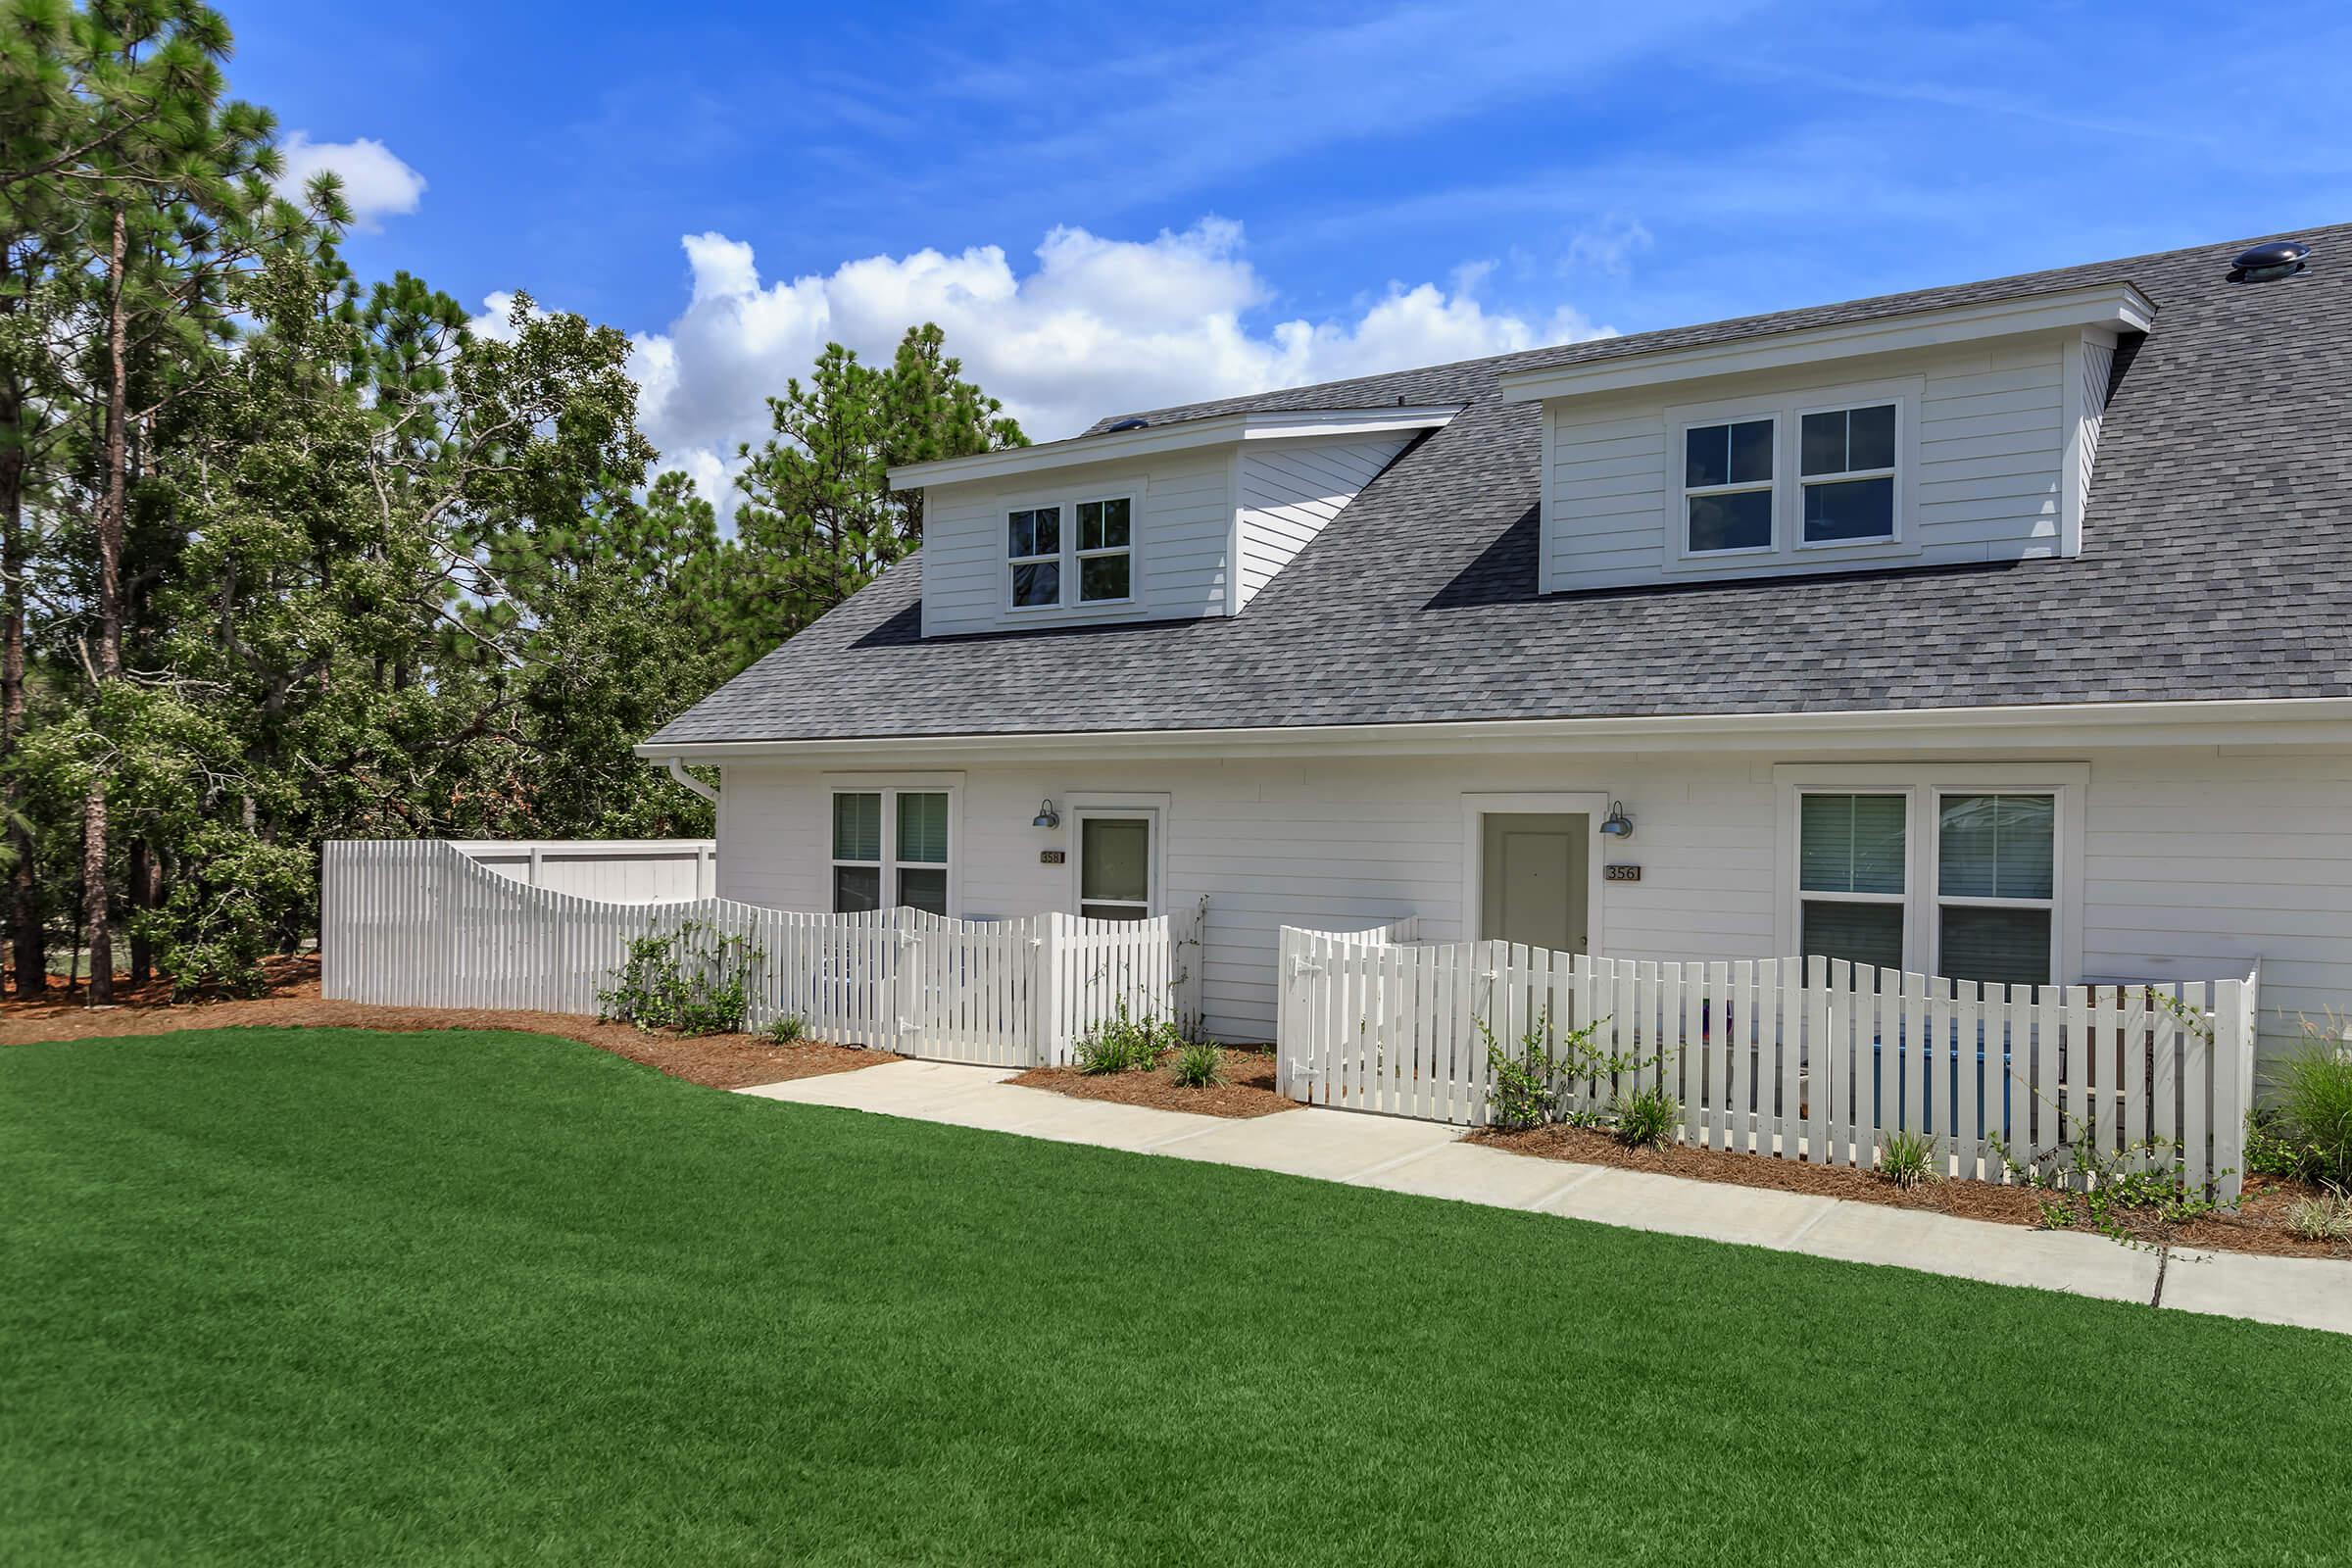 Personal yard for select homes at The Townhomes at Beau Rivage in Wilmington, NC.